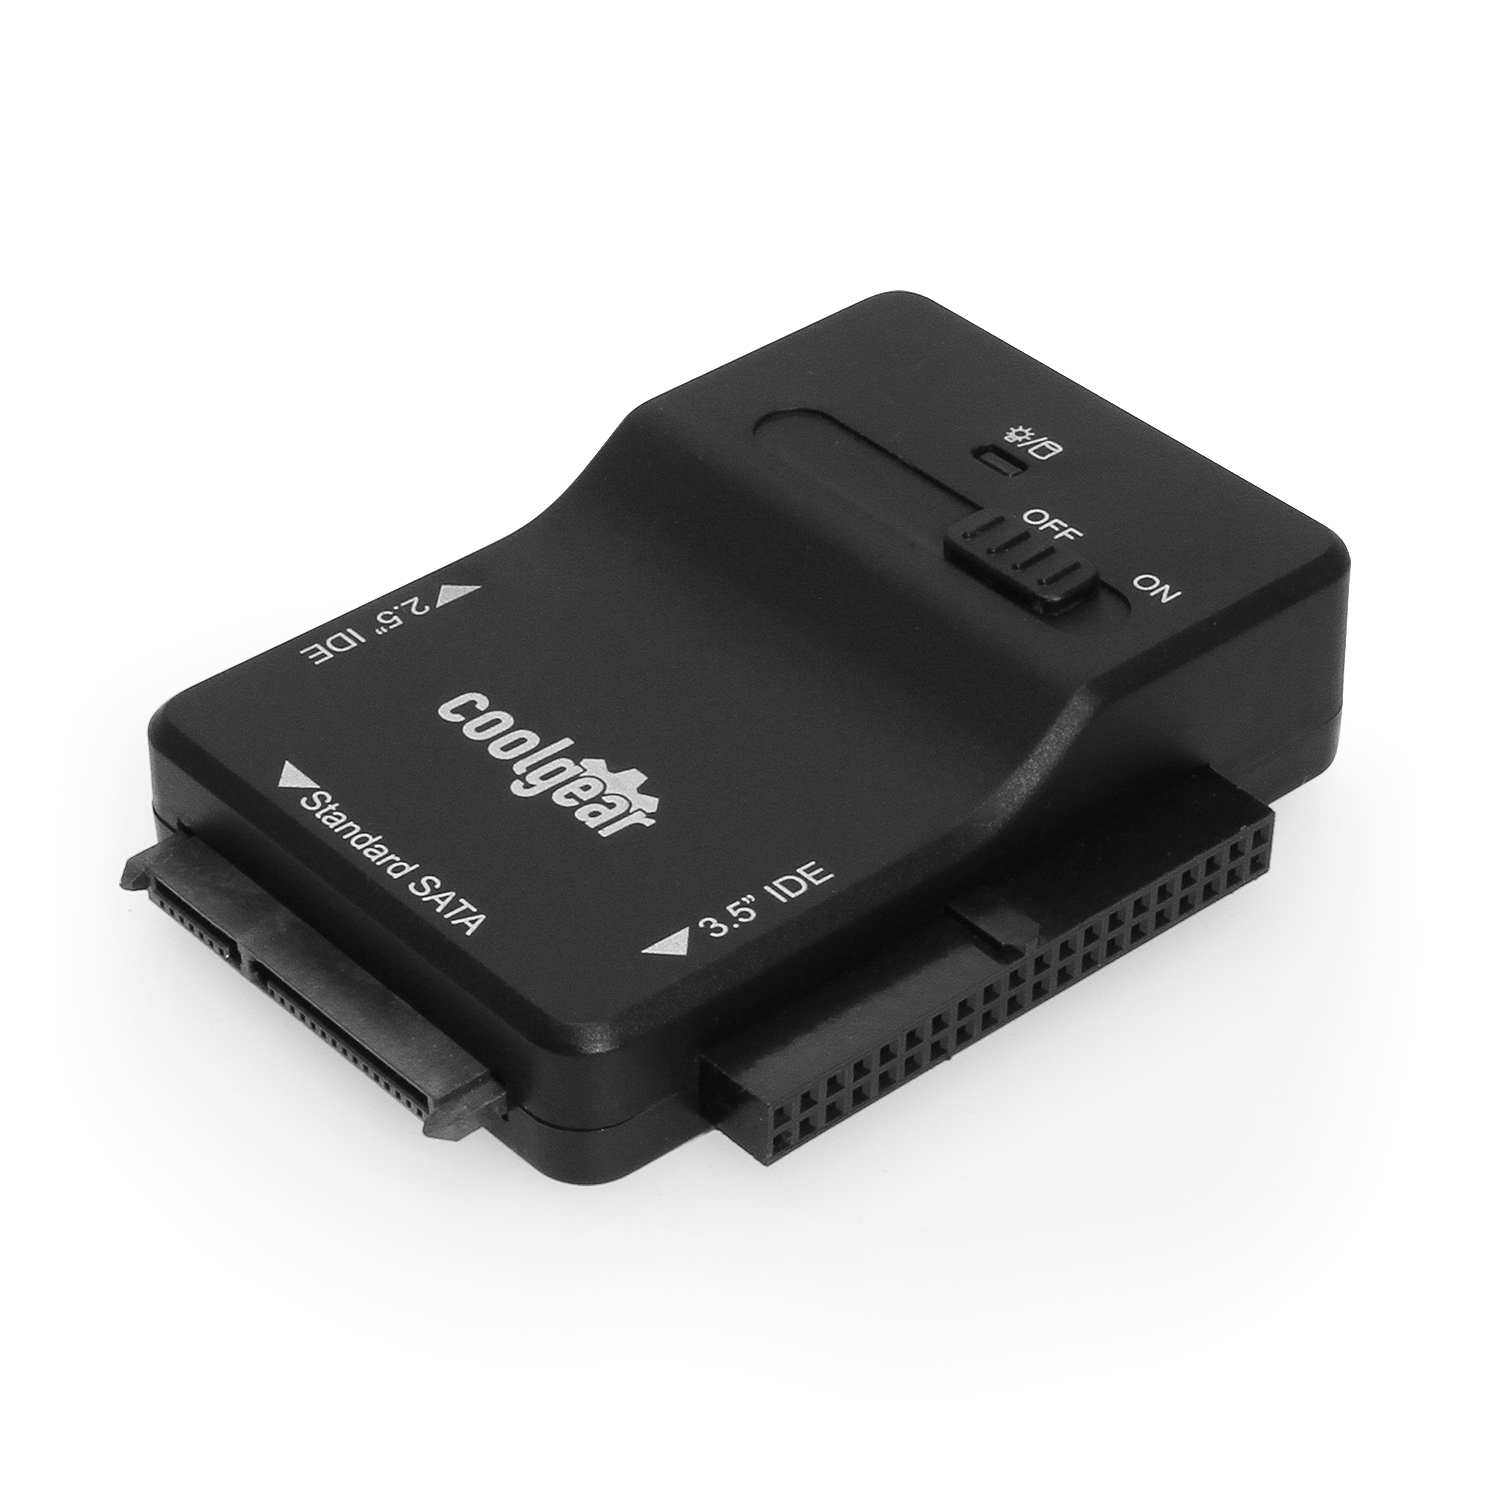 Stockage externe USB 3.1 (Type A) - Top Achat